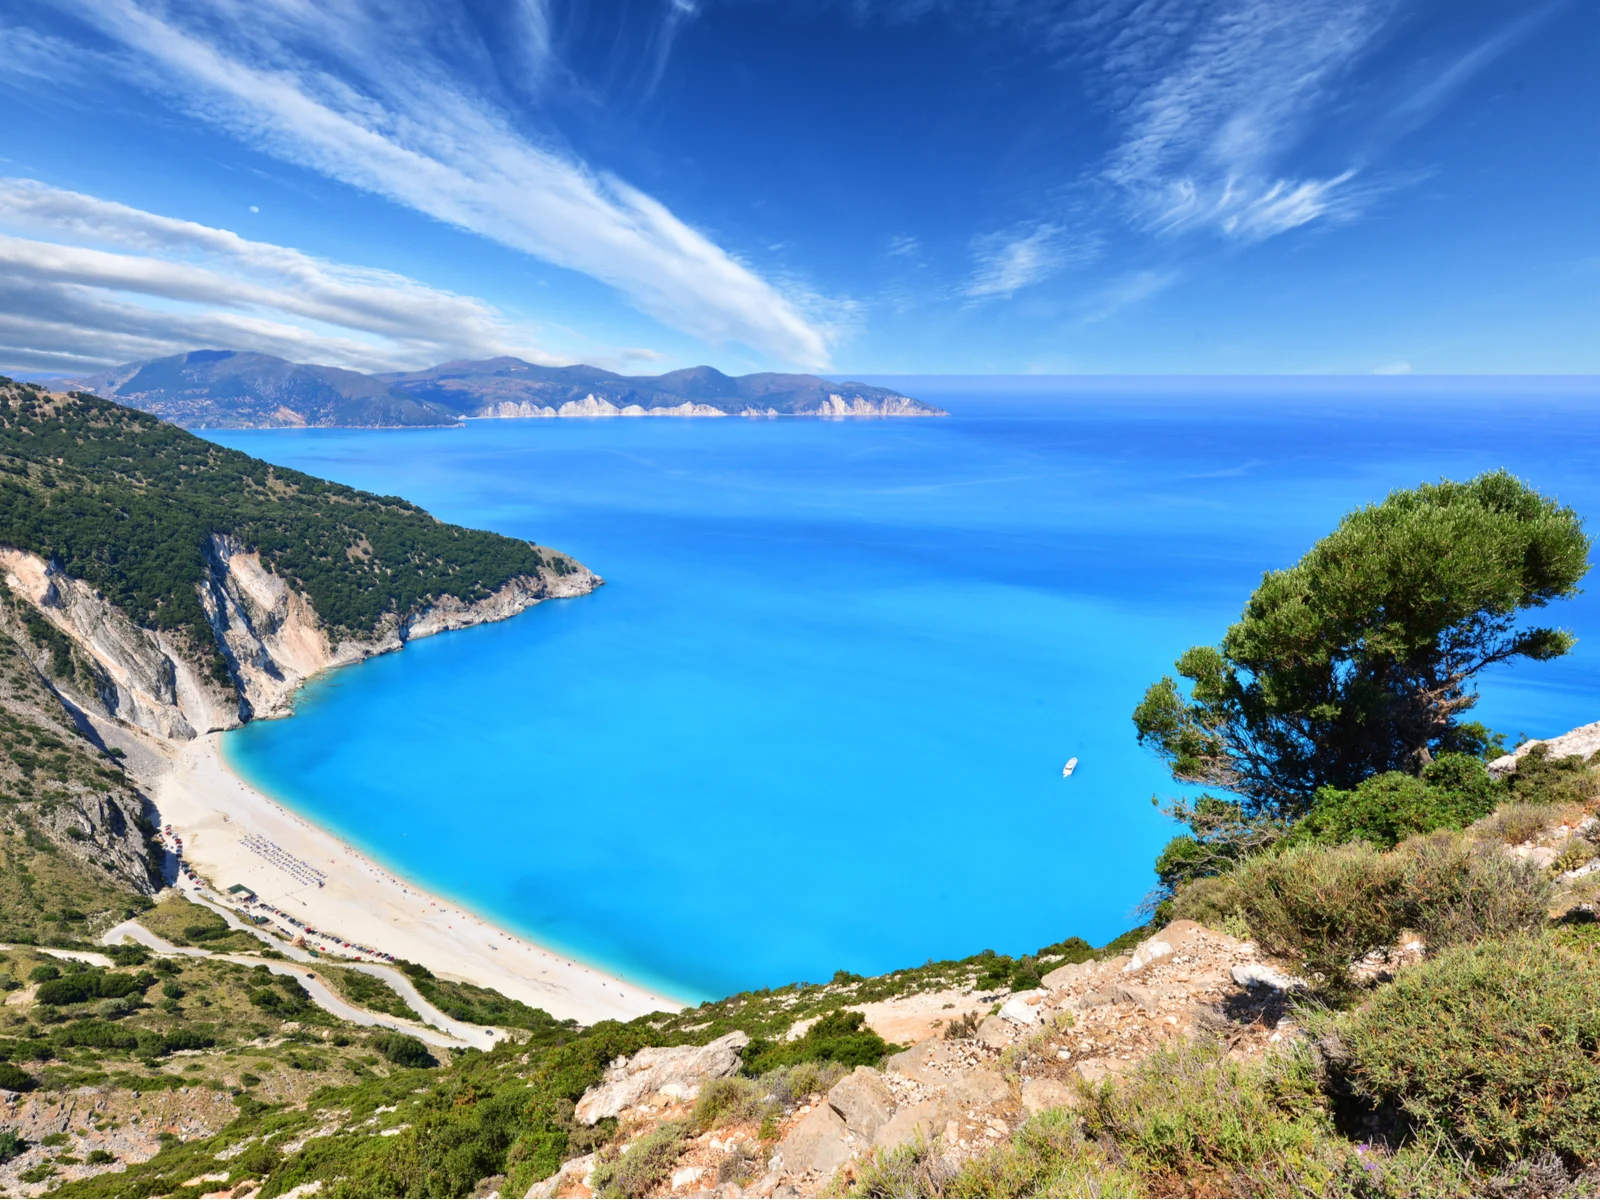 Myrtos, Kefalonia as viewed from the hilltop, one of the best beaches in Greece